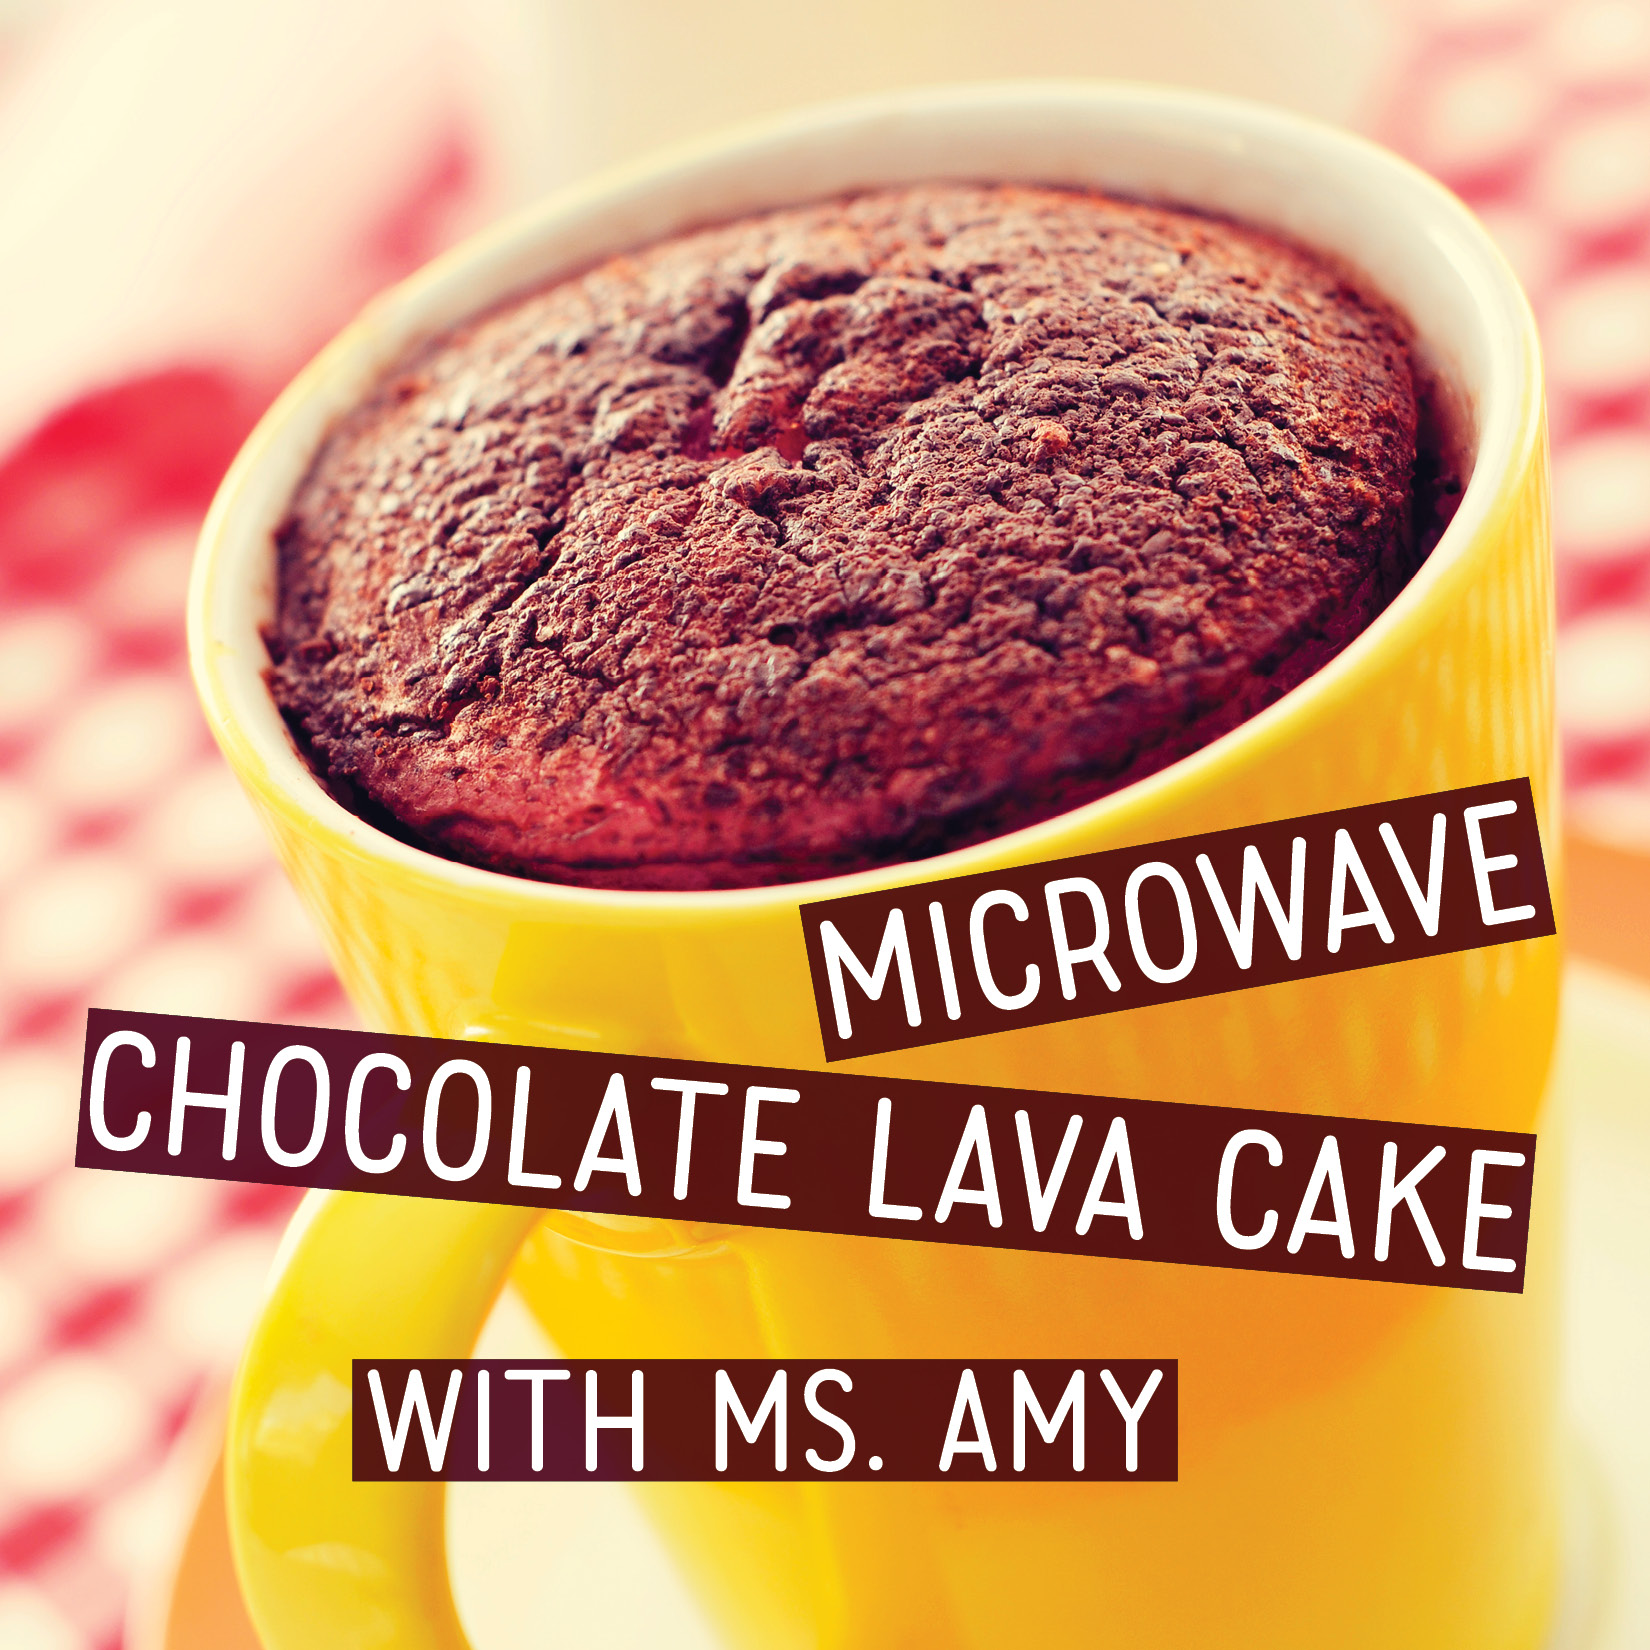 Microwave Chocolate Lava Cake with Ms. Amy